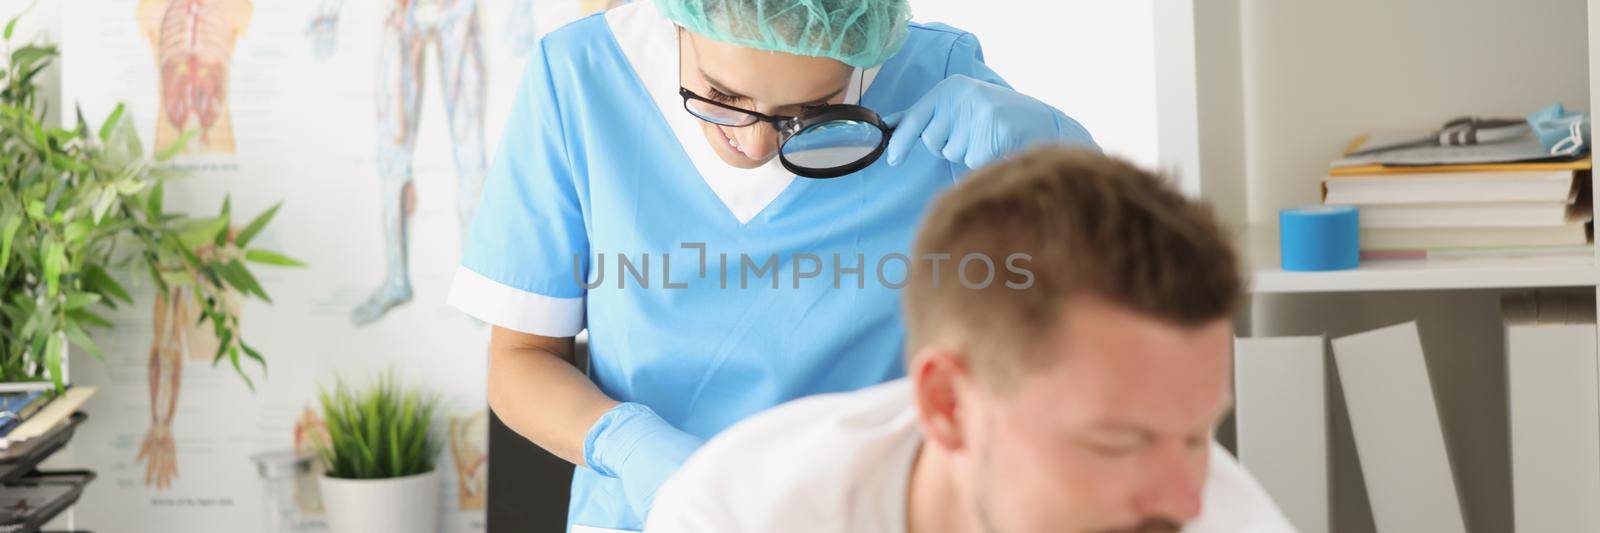 Portrait of dermatologist doctor examines mole on patients body with magnifying glass. Man worried about birthmark. Diagnostic, medicine, analysis concept